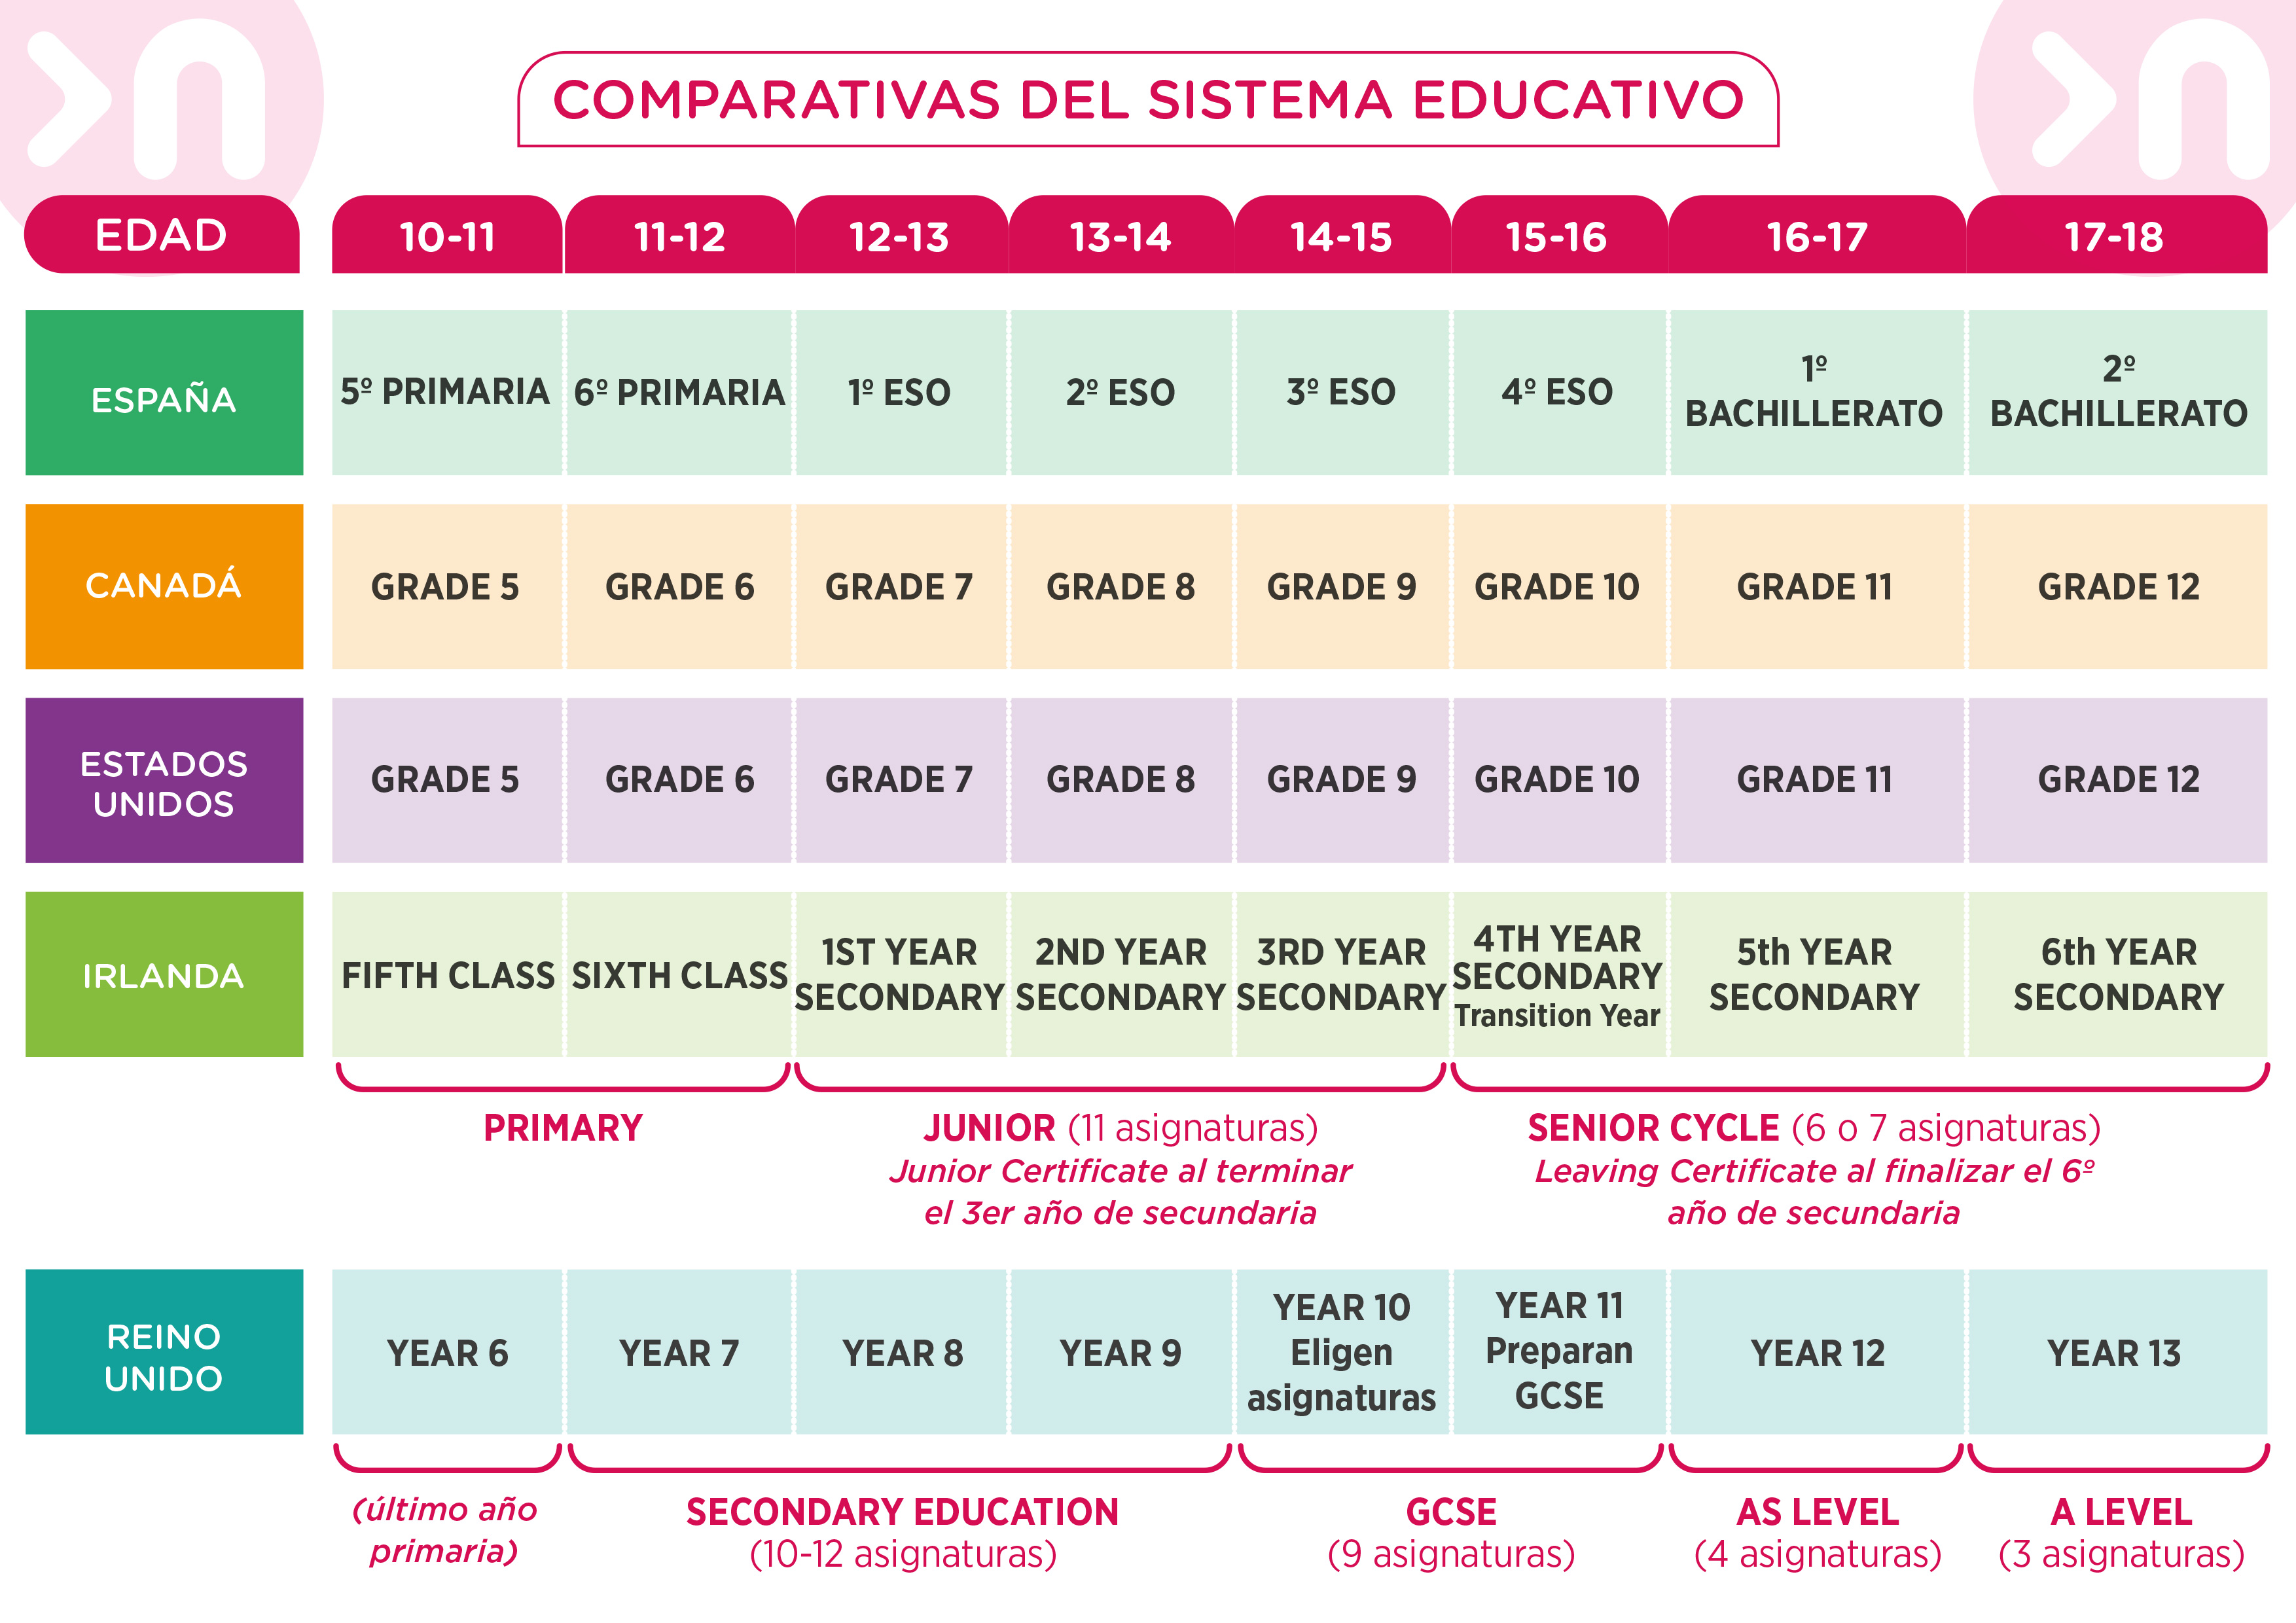 → Compare the education systems 